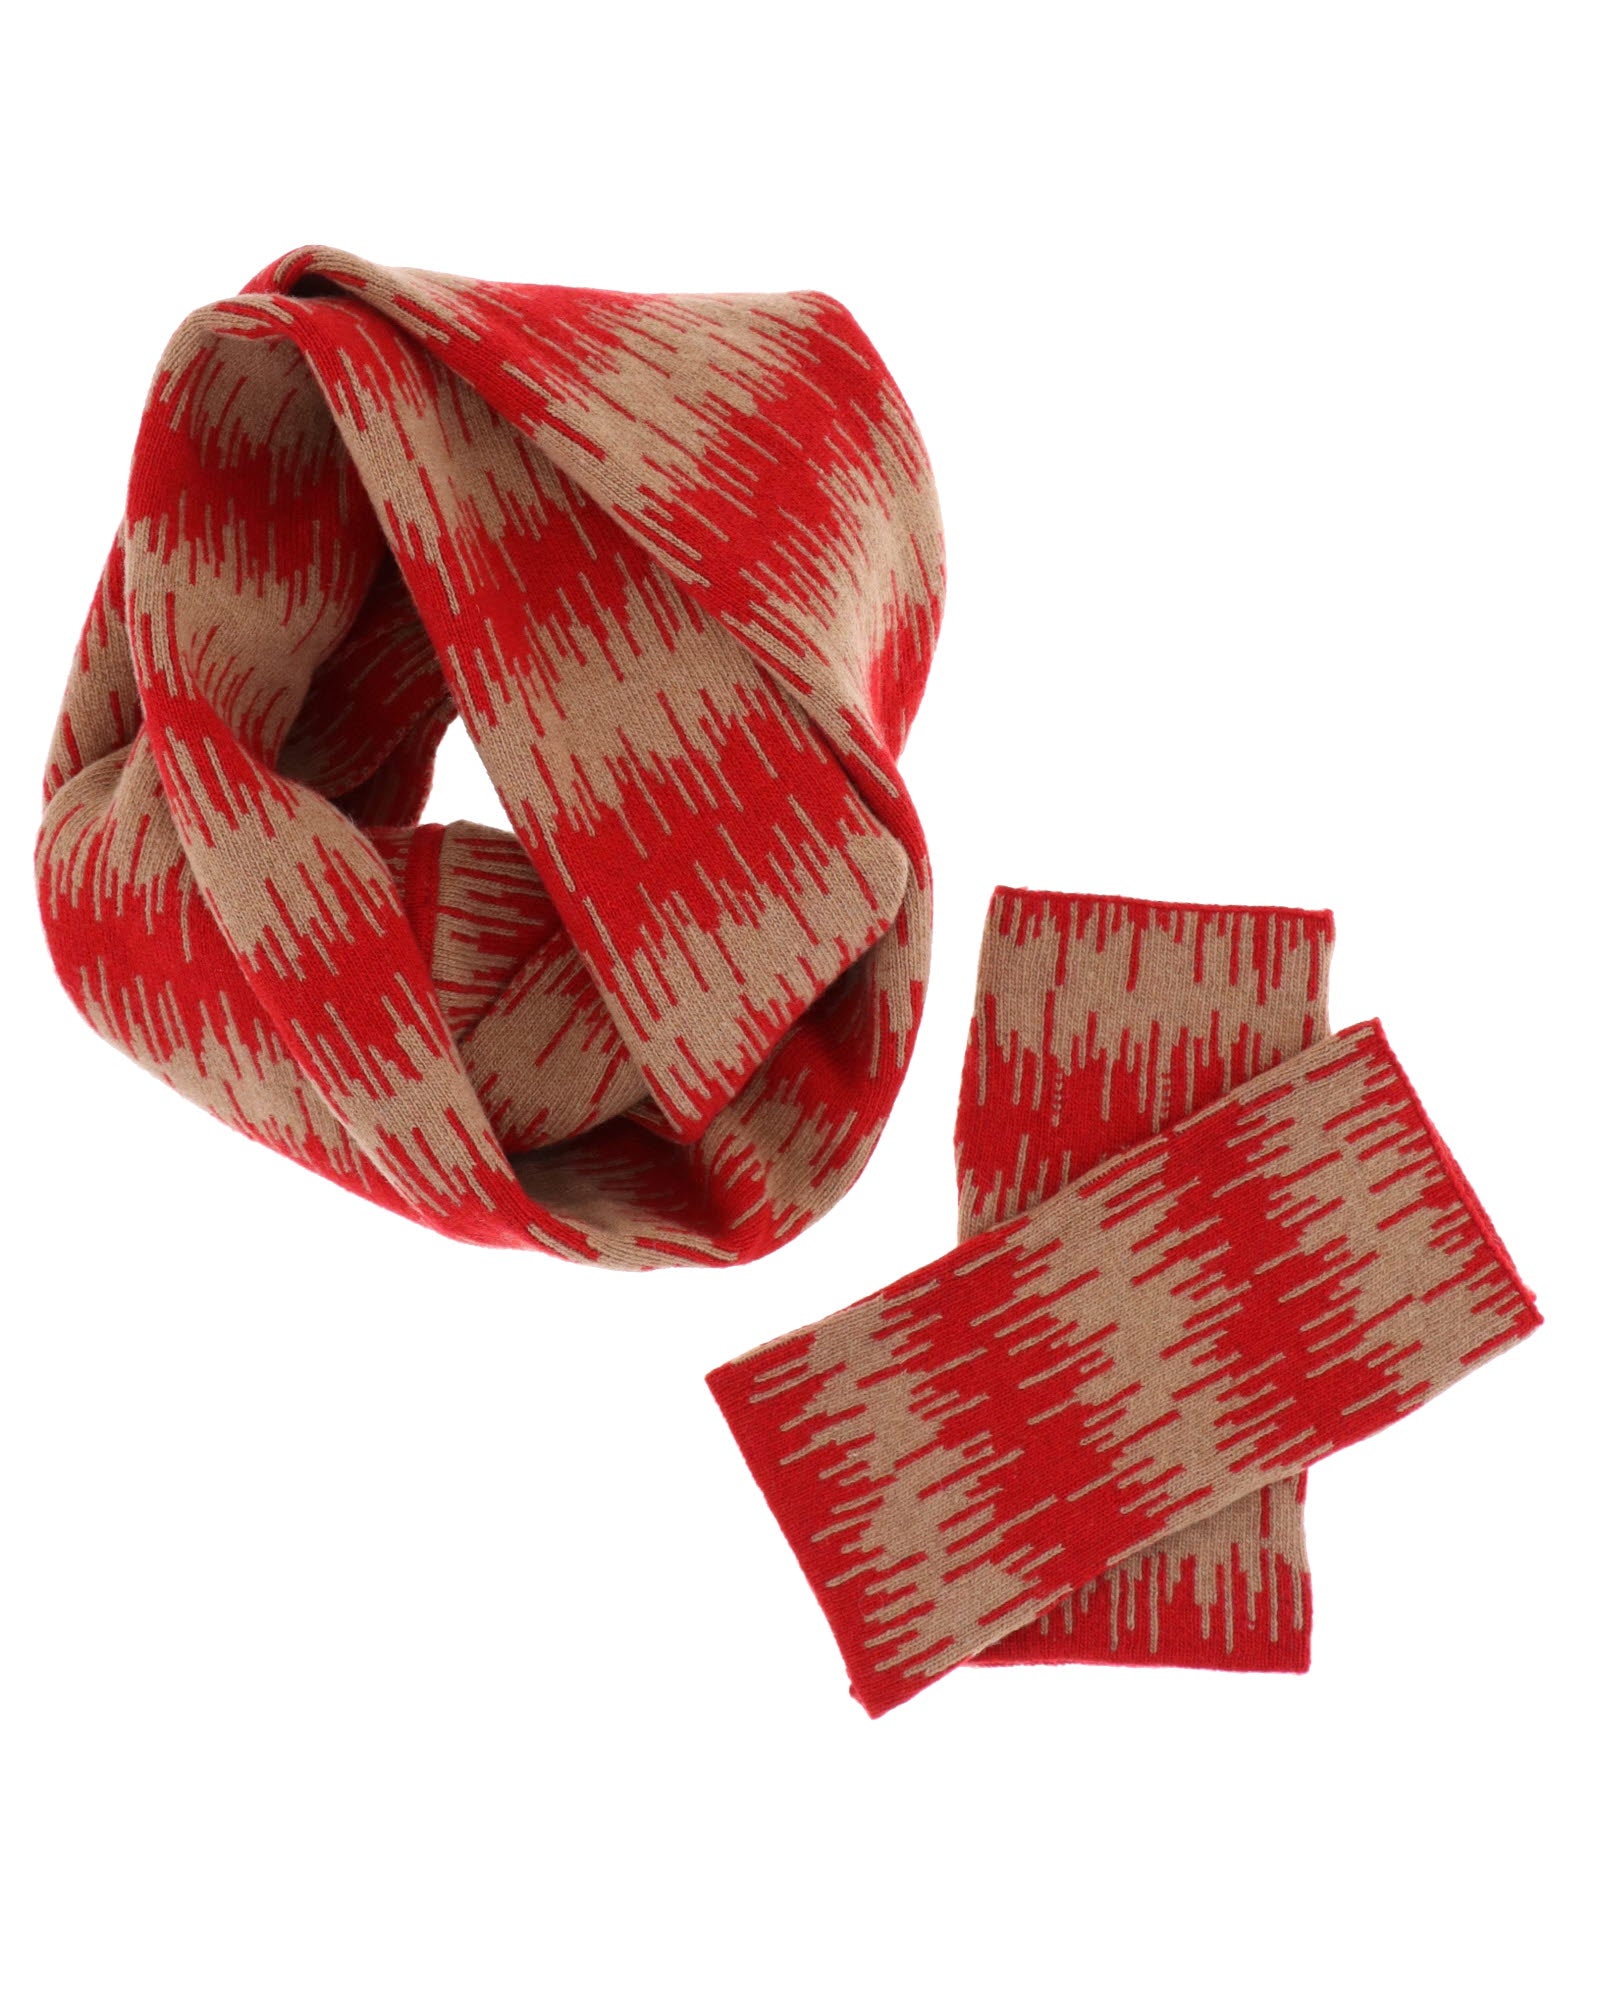 Cashmere Blend Wave Wrist Warmers Venetian Red and Camel